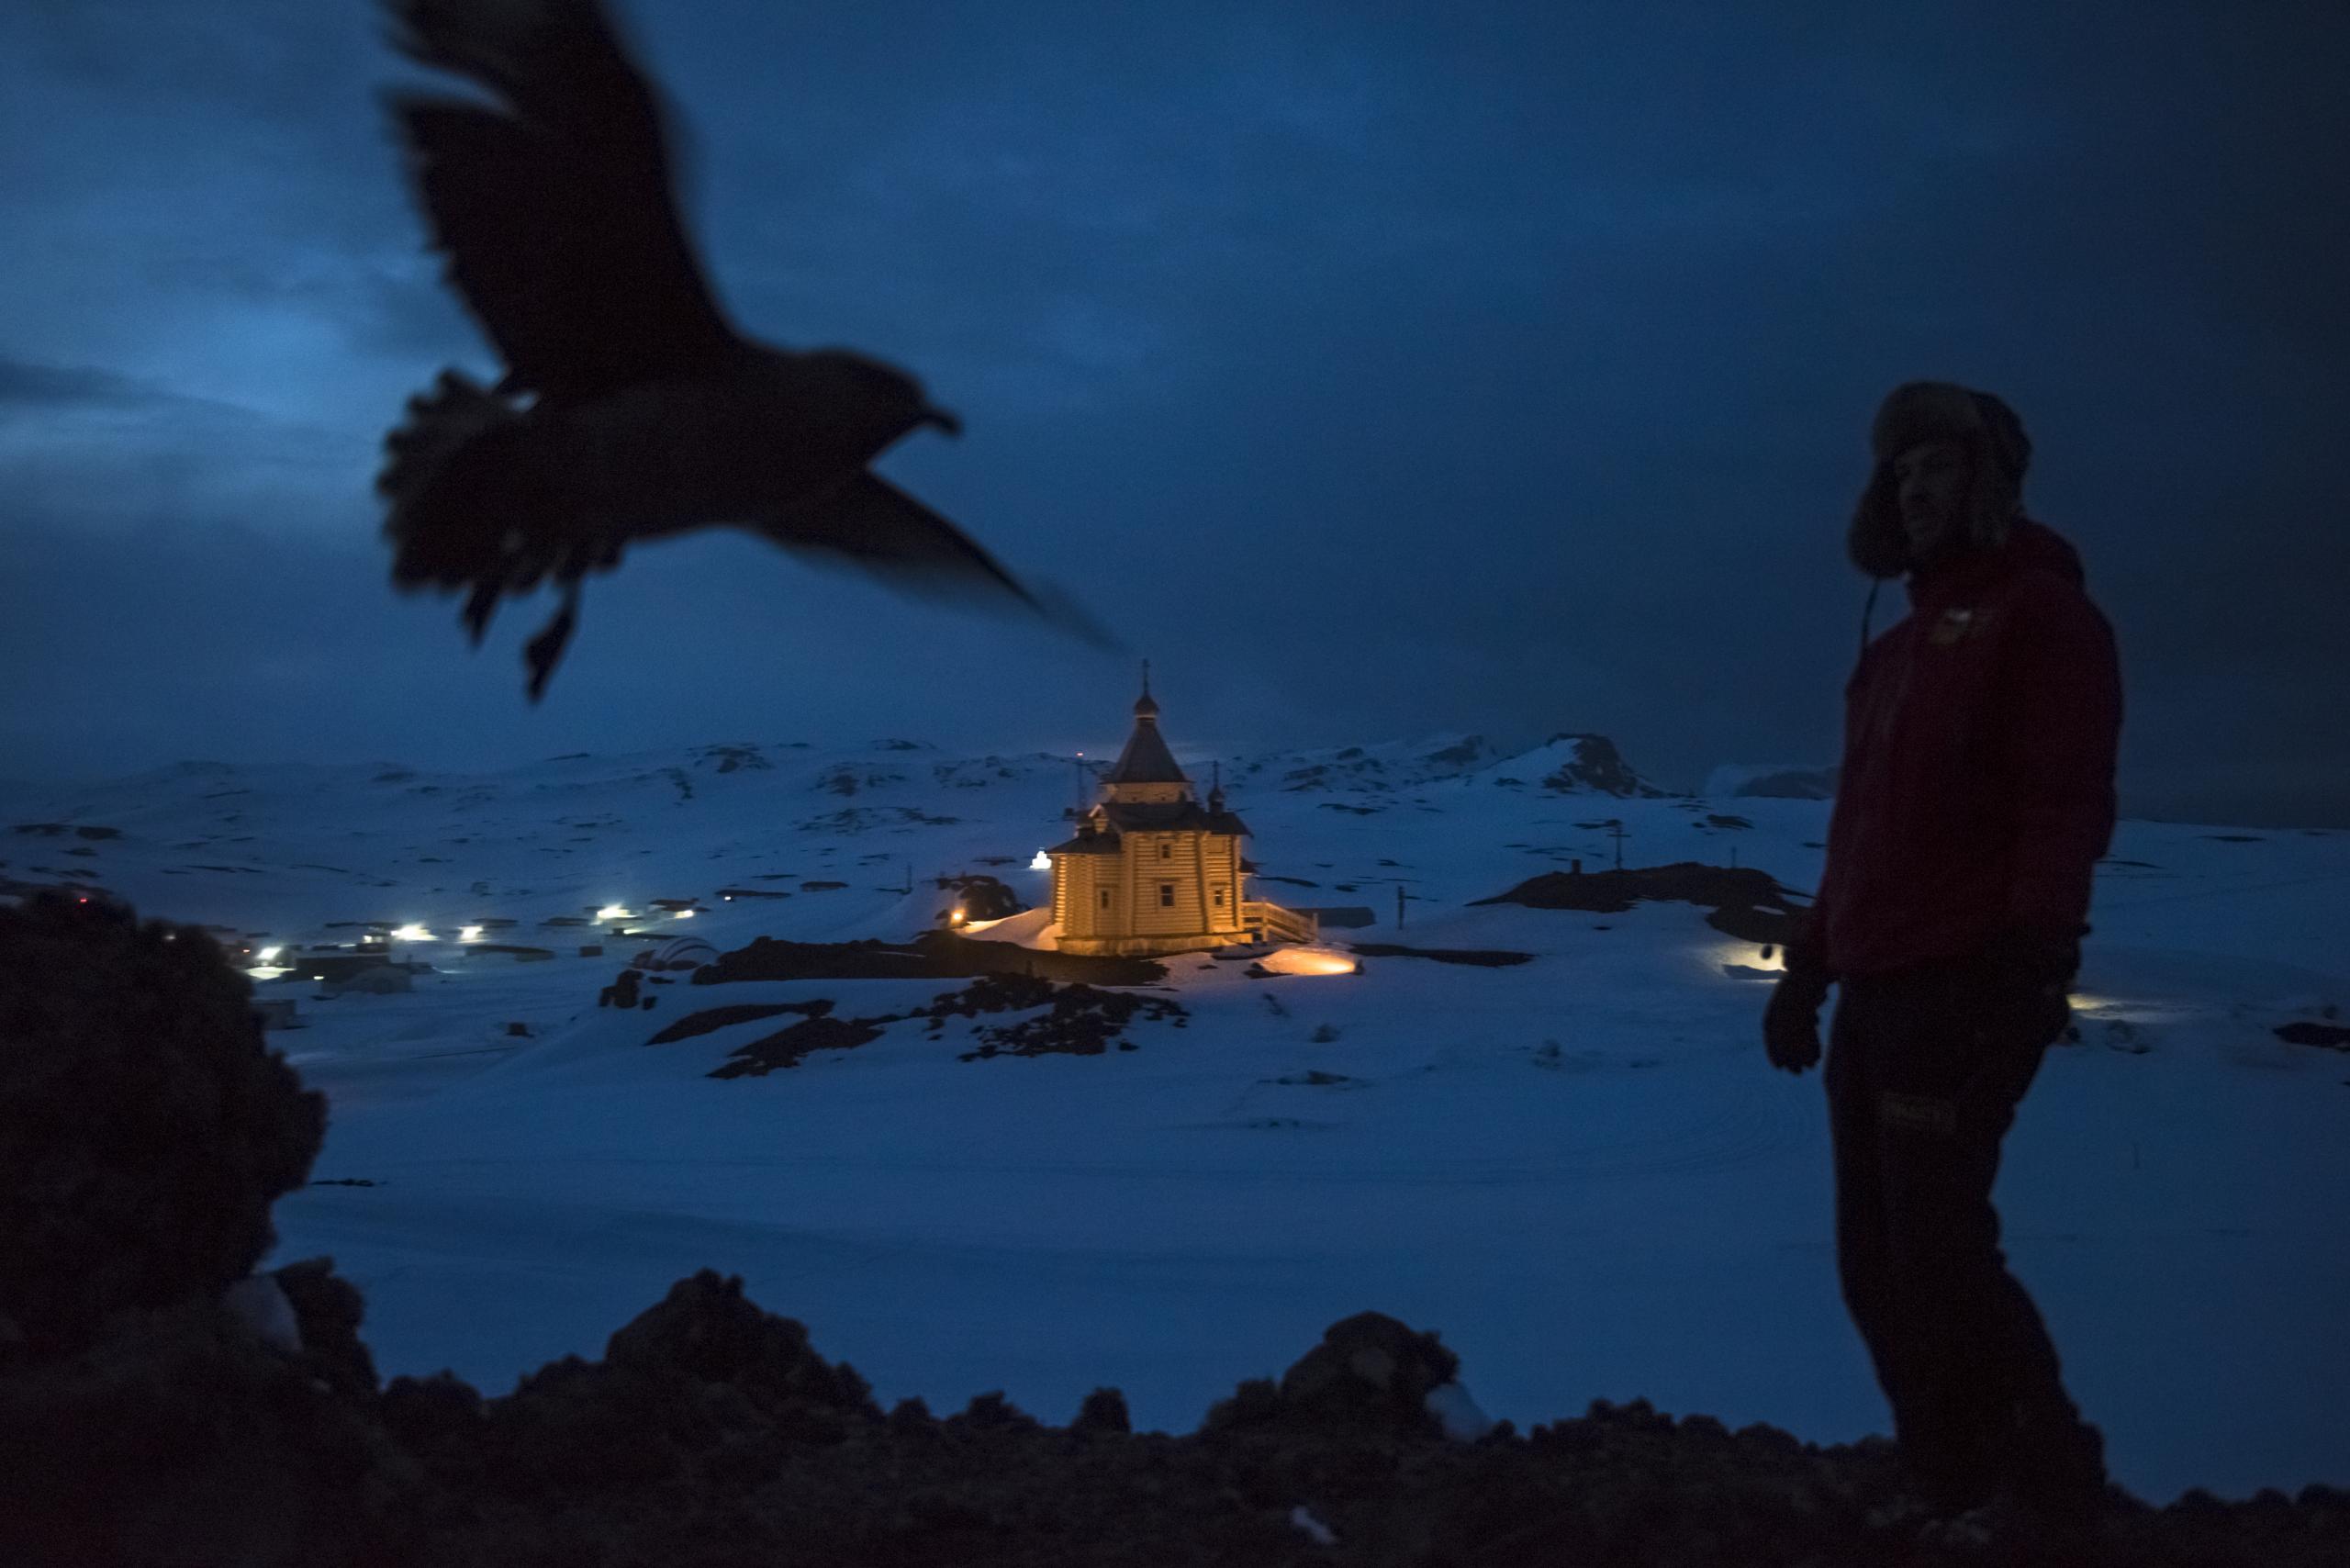 Dr. Ernesto Molina, who is supported by the Chilean Antarctic Institute, walks by the Bellingshausen Russian Antarctic base, with its Orthodox Church of the Holy Trinity, in Fildes Bay. A number of countries, including Chile, Poland and Russia, have set up scientific stations on King George Island in the Antarctic. By the Antarctic Treaty, which came into force in 1961, Antarctica was set aside as a scientific preserve, with freedom of investigation and free intellectual exchange. No country may exploit mineral resources or exert territorial claims. The treaty is currently in force until 2048, but a number of countries have an eye on asserting greater influence before the renewal date. Some are looking to the strategic and commercial possibilities that exist right now, such as iceberg harvesting (Antarctica is estimated to have the biggest reserves of fresh water on the planet), krill fishing, and expanding global navigation abilities. © Daniel Berehulak